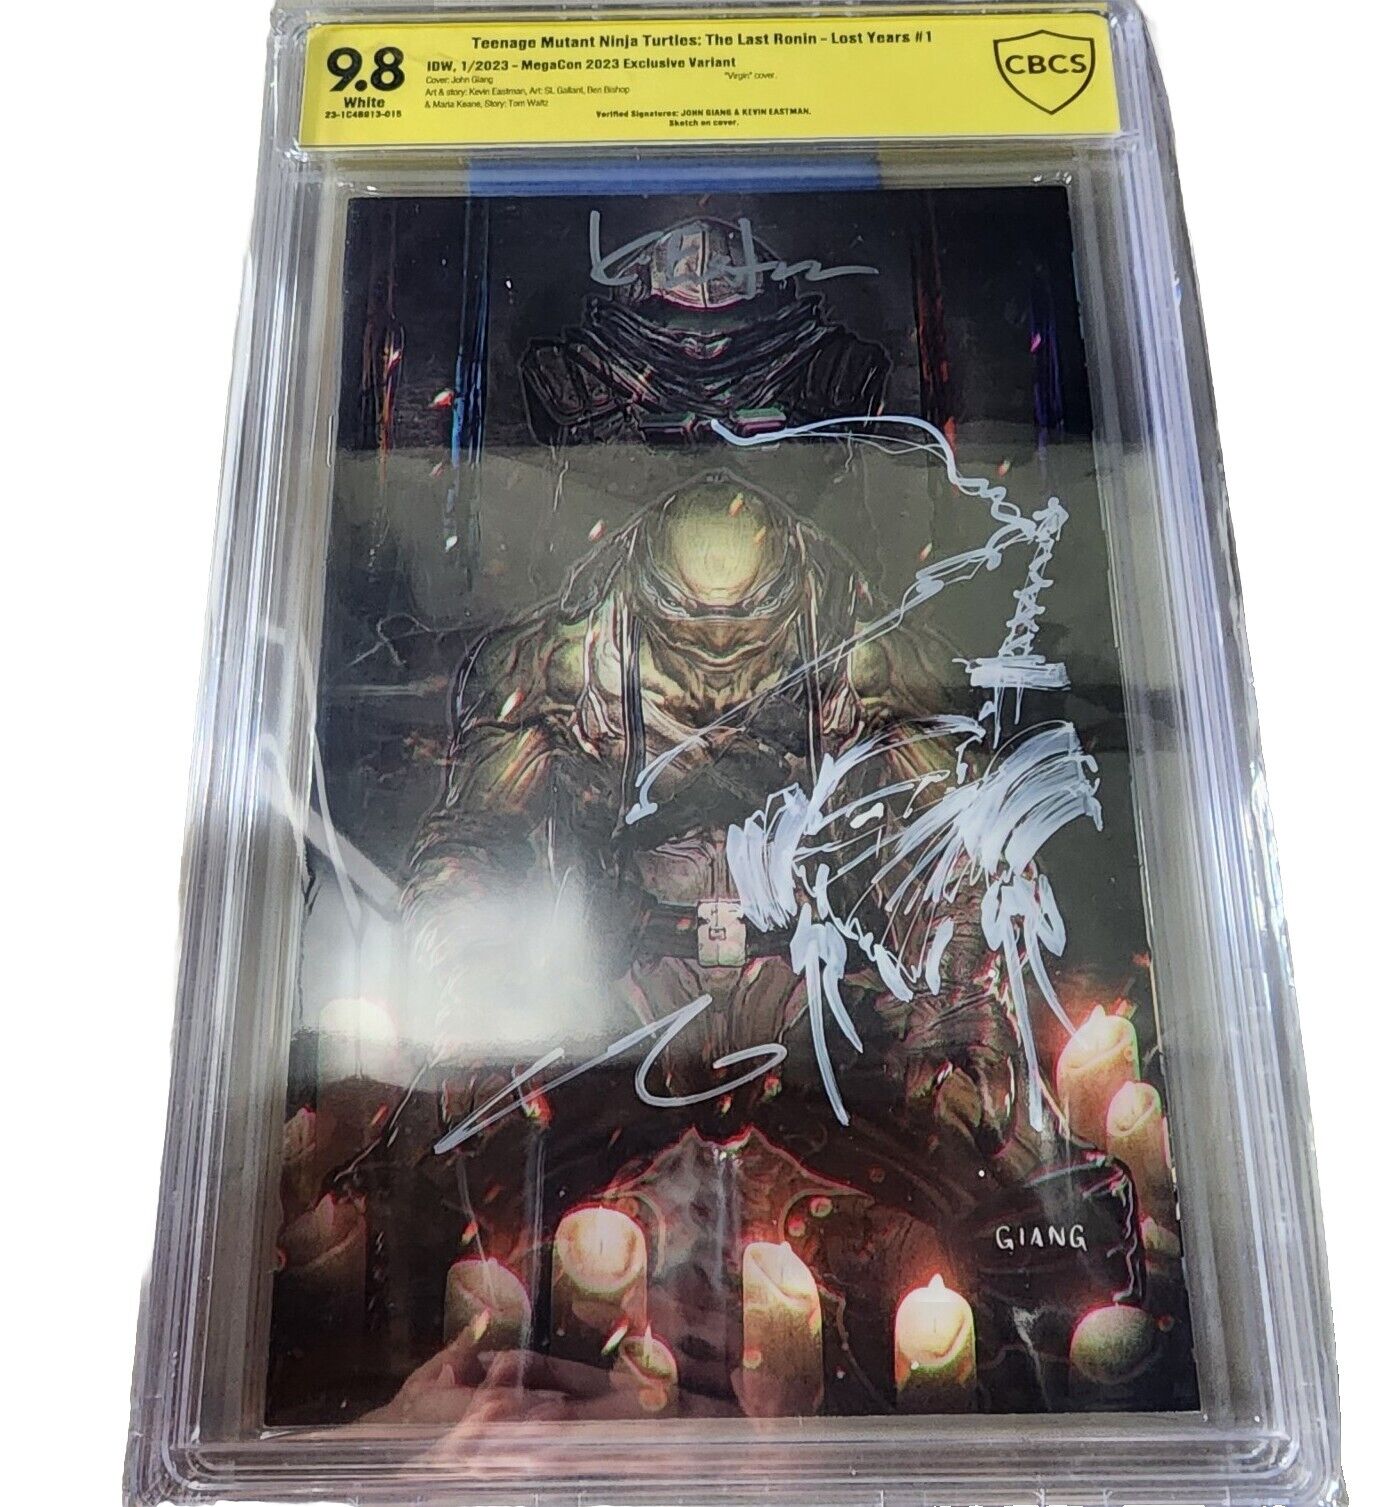 TMNT Last Ronin Lost Years #1  Giang 2x SIGNED W Ronin SKETCH CBCS 9.8 Megacon